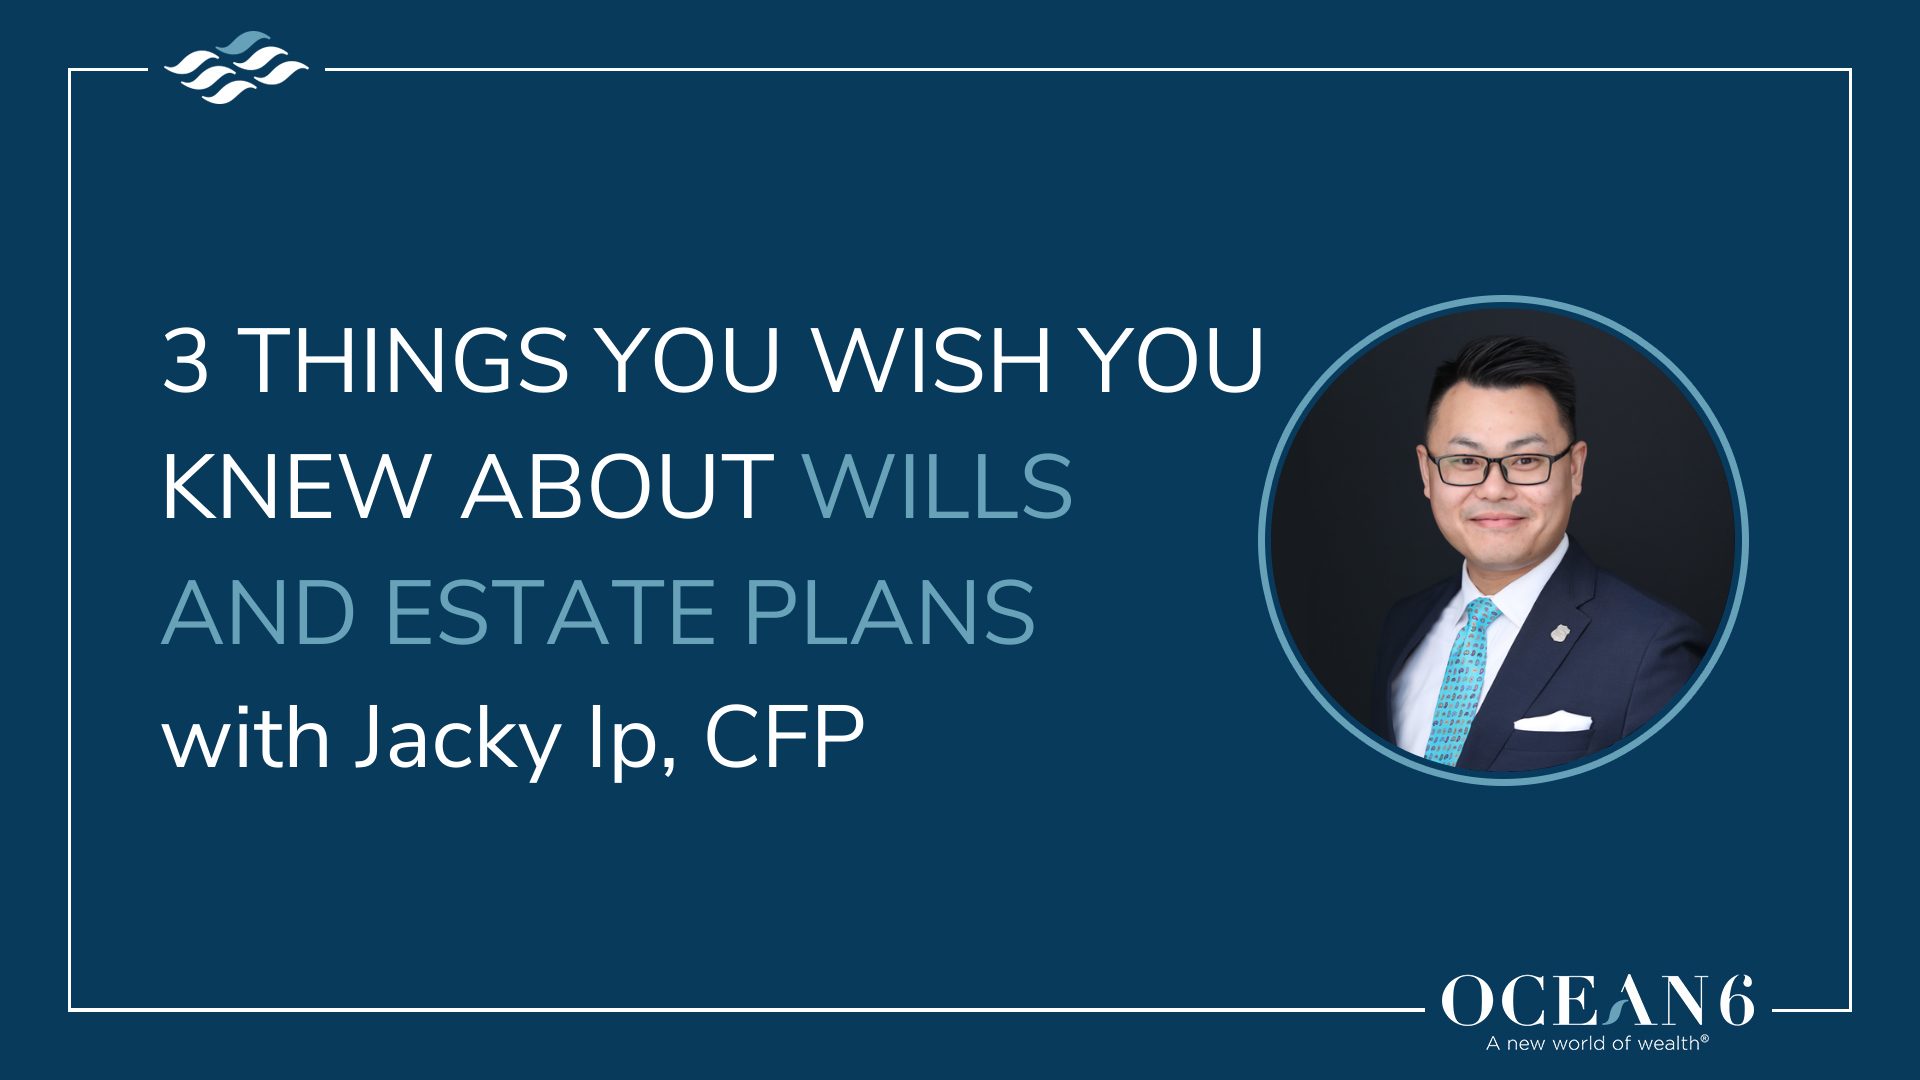 Advisor headshot - 3 things you wish you knew about wills and estate plans